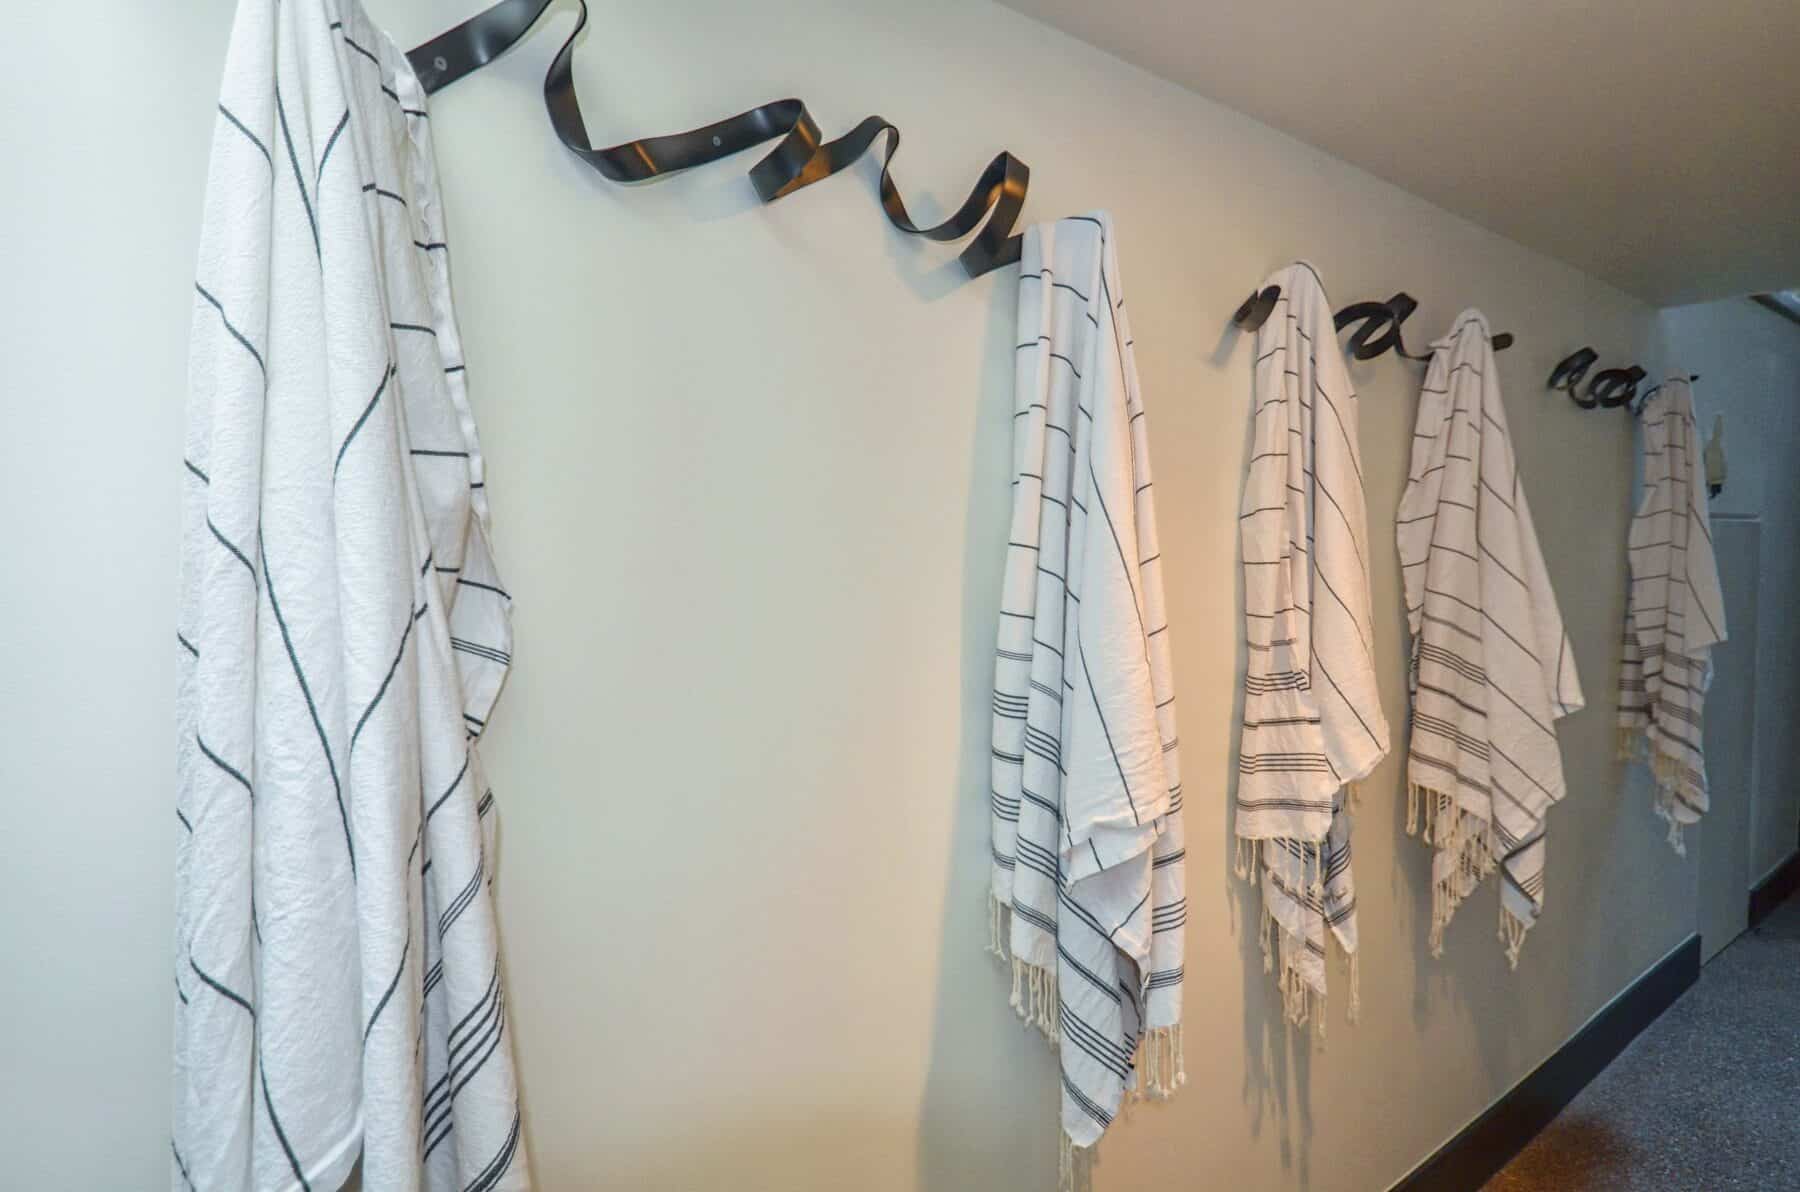 Metal Art Hooks for Turkish Towels for Swimming Pool Area in Aspen, Colorado Custom Home. Luxury Home Building Interiors